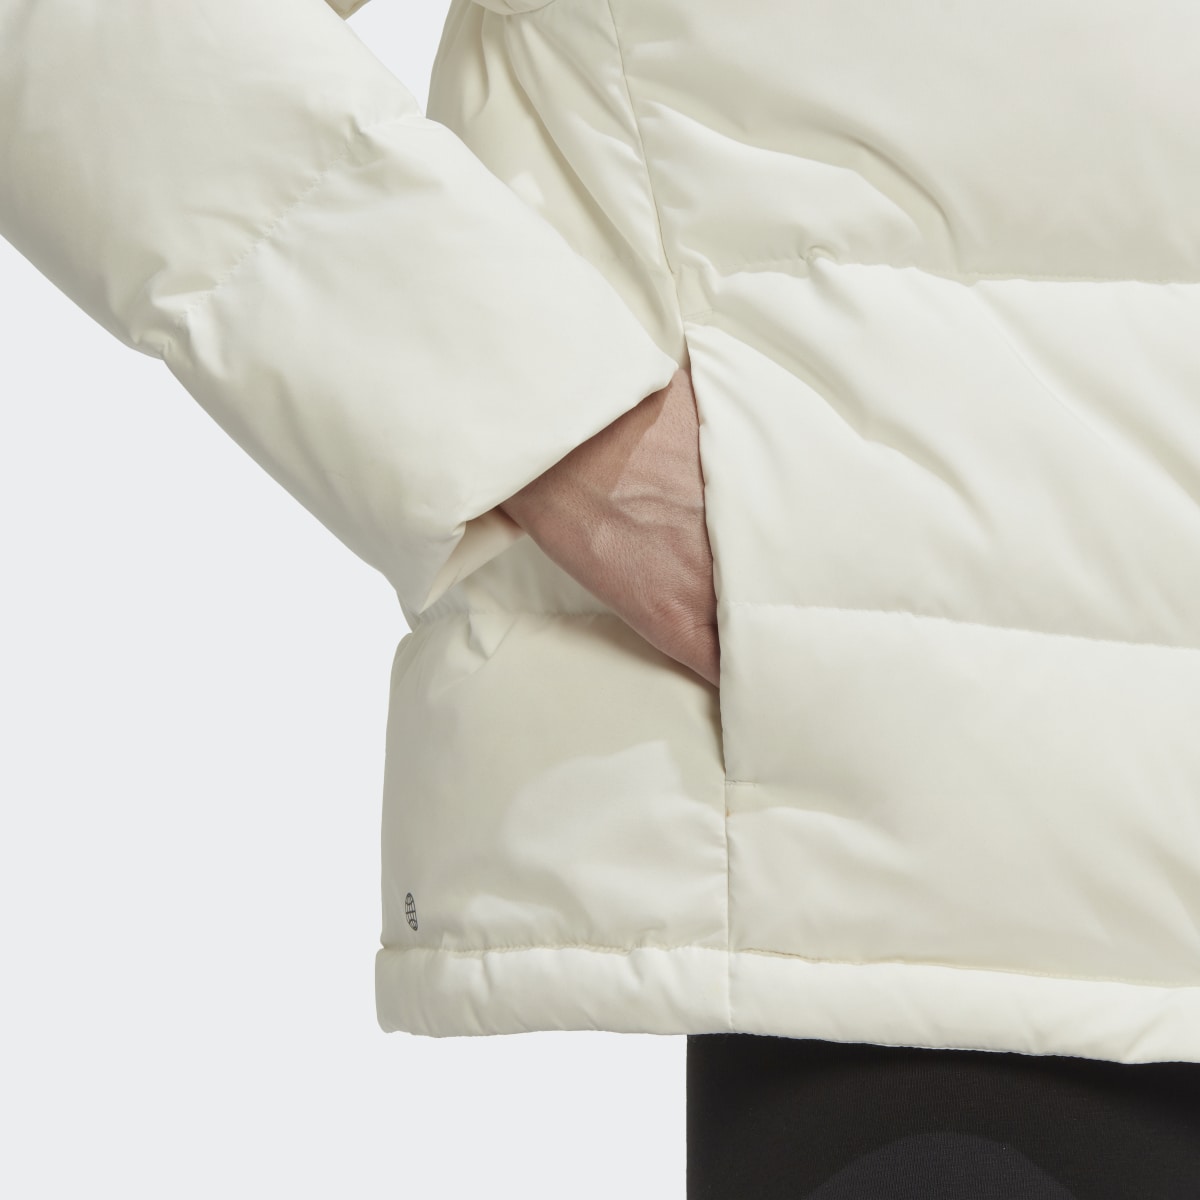 Adidas Helionic Relaxed Down Jacket. 7